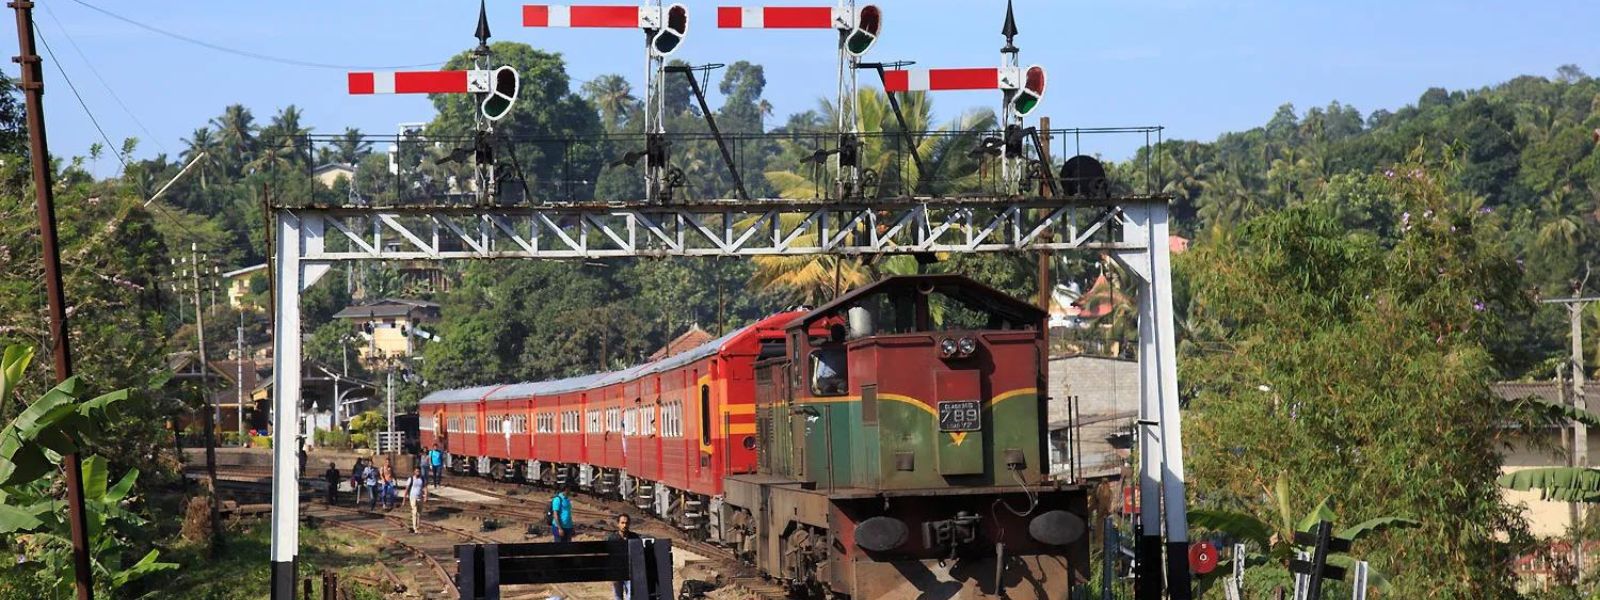 Railway Department grapples with driver shortage